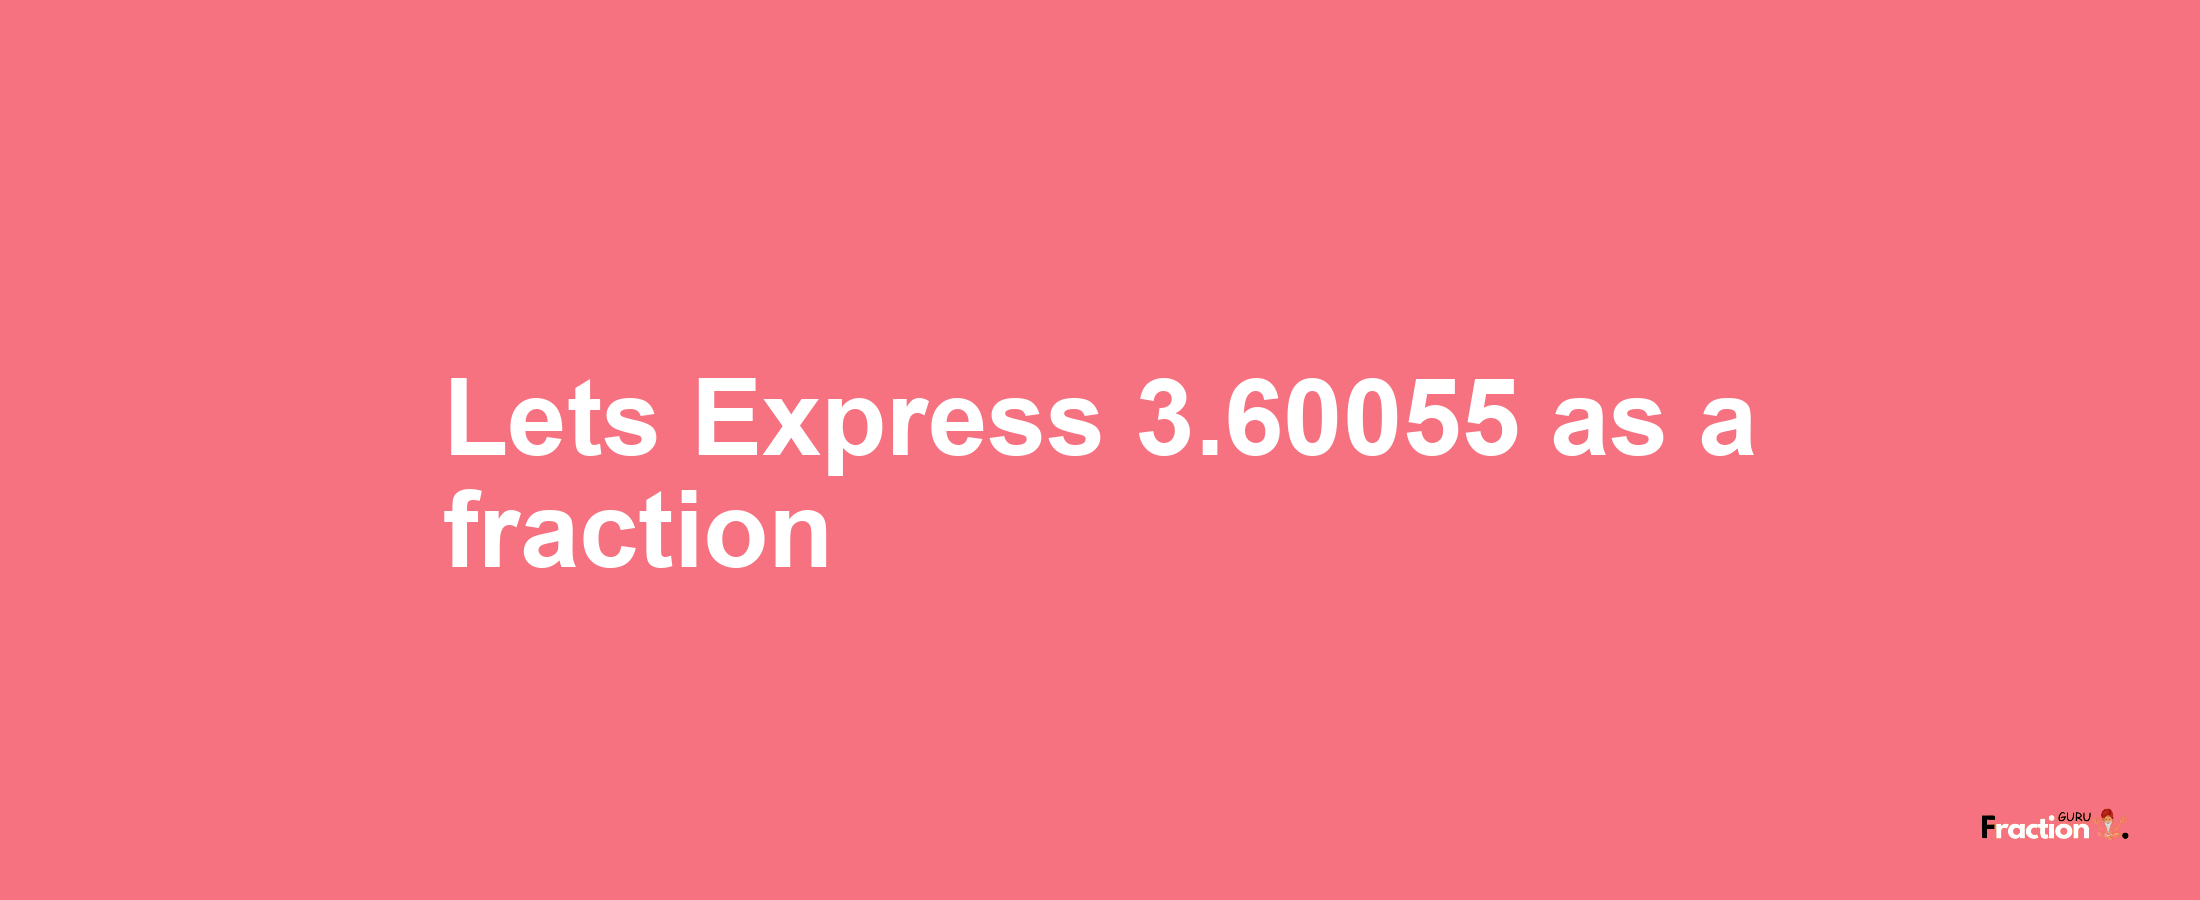 Lets Express 3.60055 as afraction